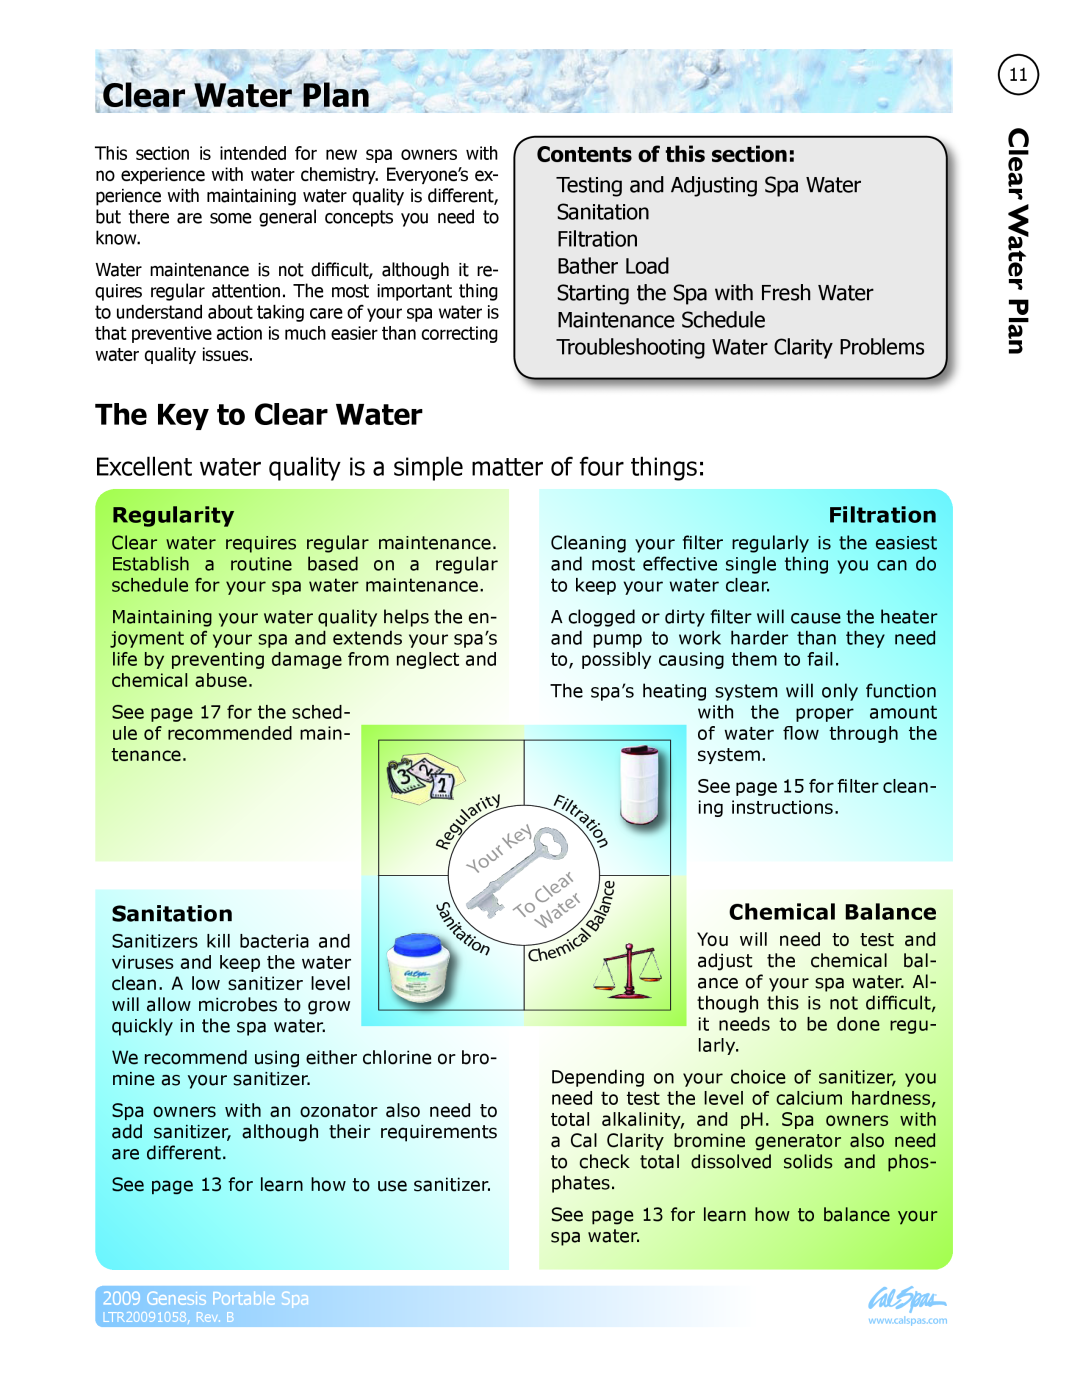 Cal Spas LTR20091058 manual Clear Water Plan, The Key to Clear Water 